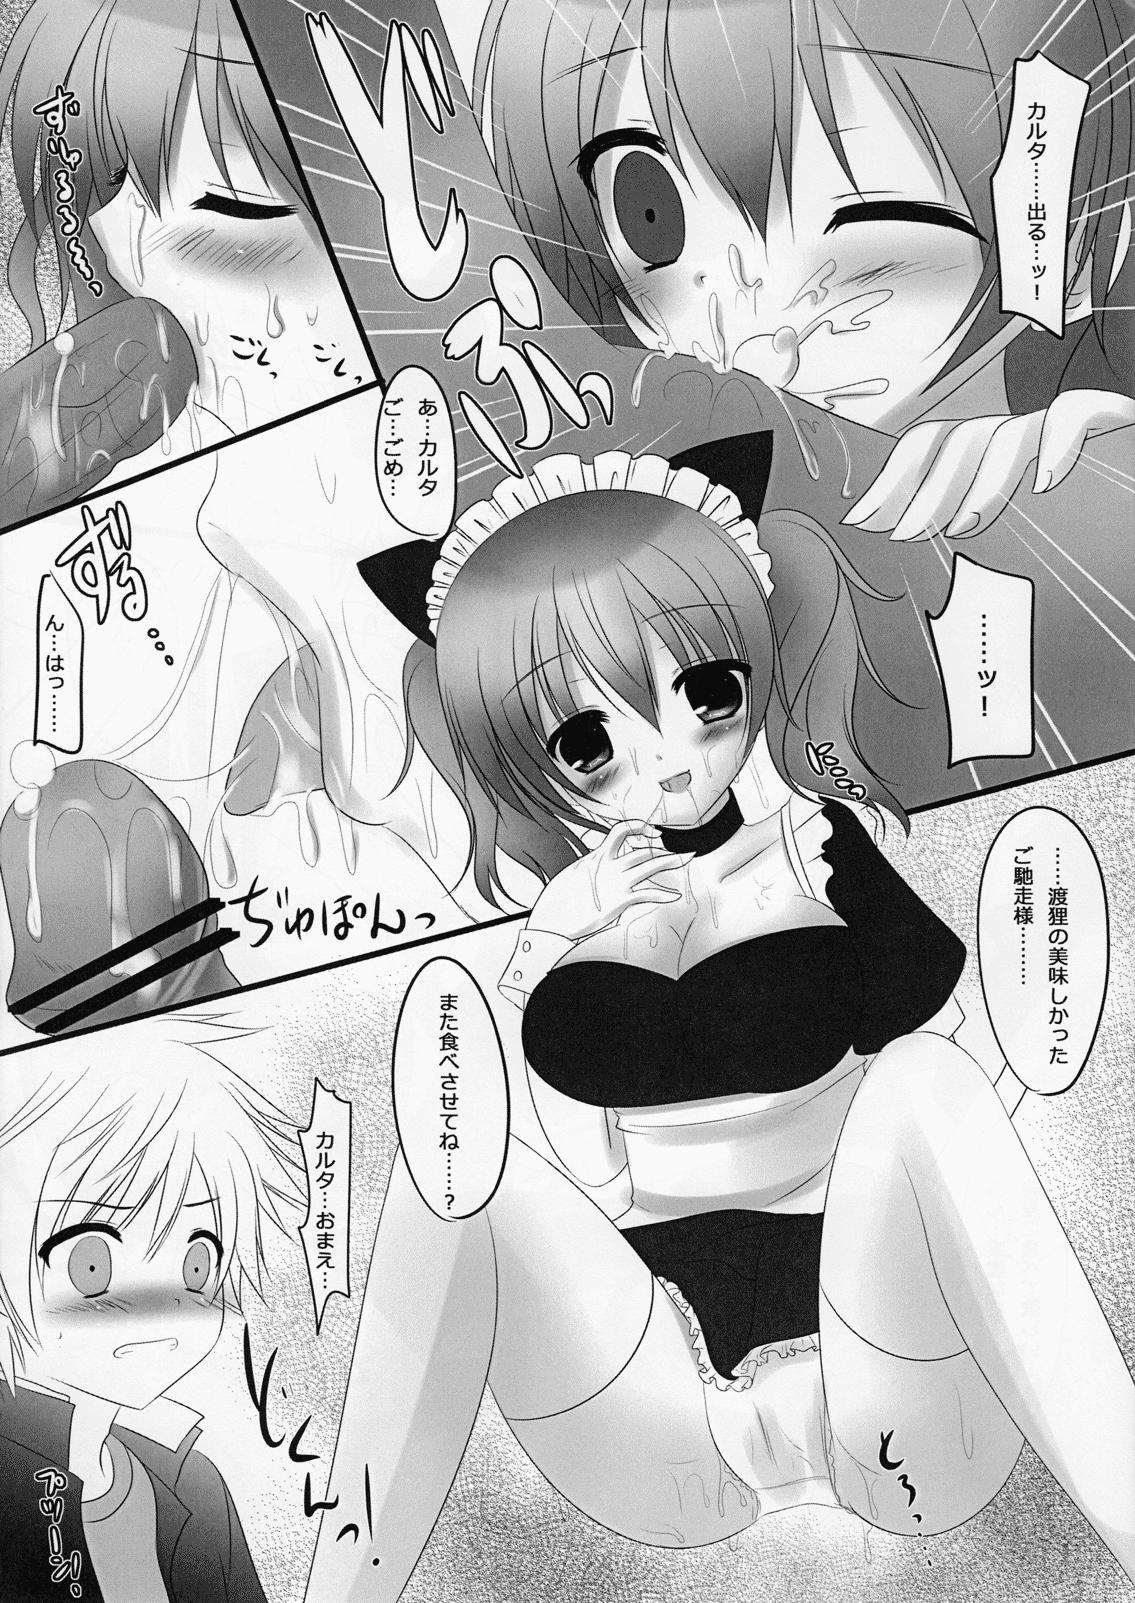 Show Sweets Paradise - Inu x boku ss Hardcore Rough Sex - Page 6